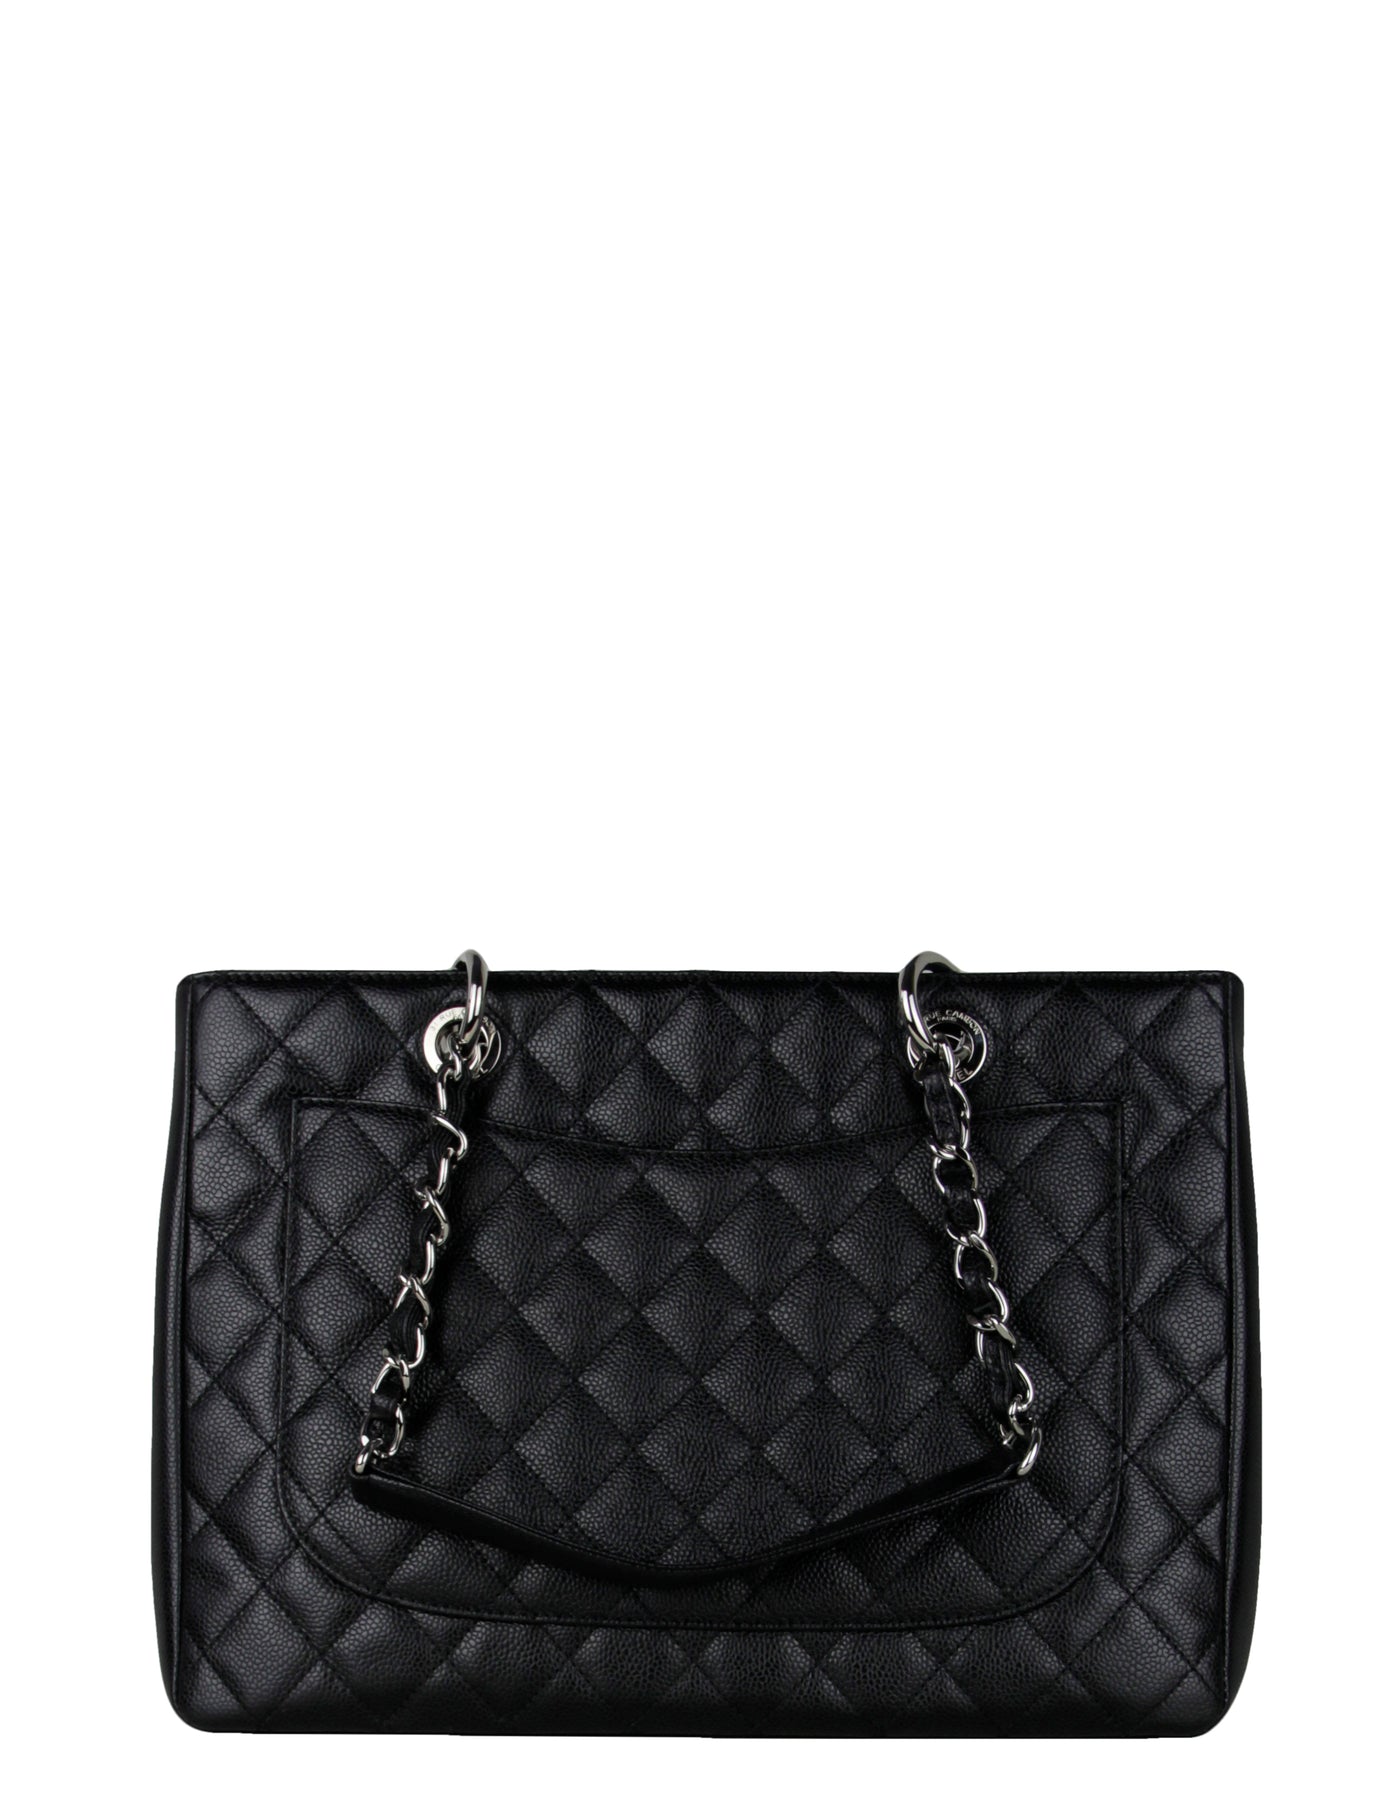 Chanel Black Caviar Leather Quilted Grand Shopper Tote GST Bag – ASC Resale